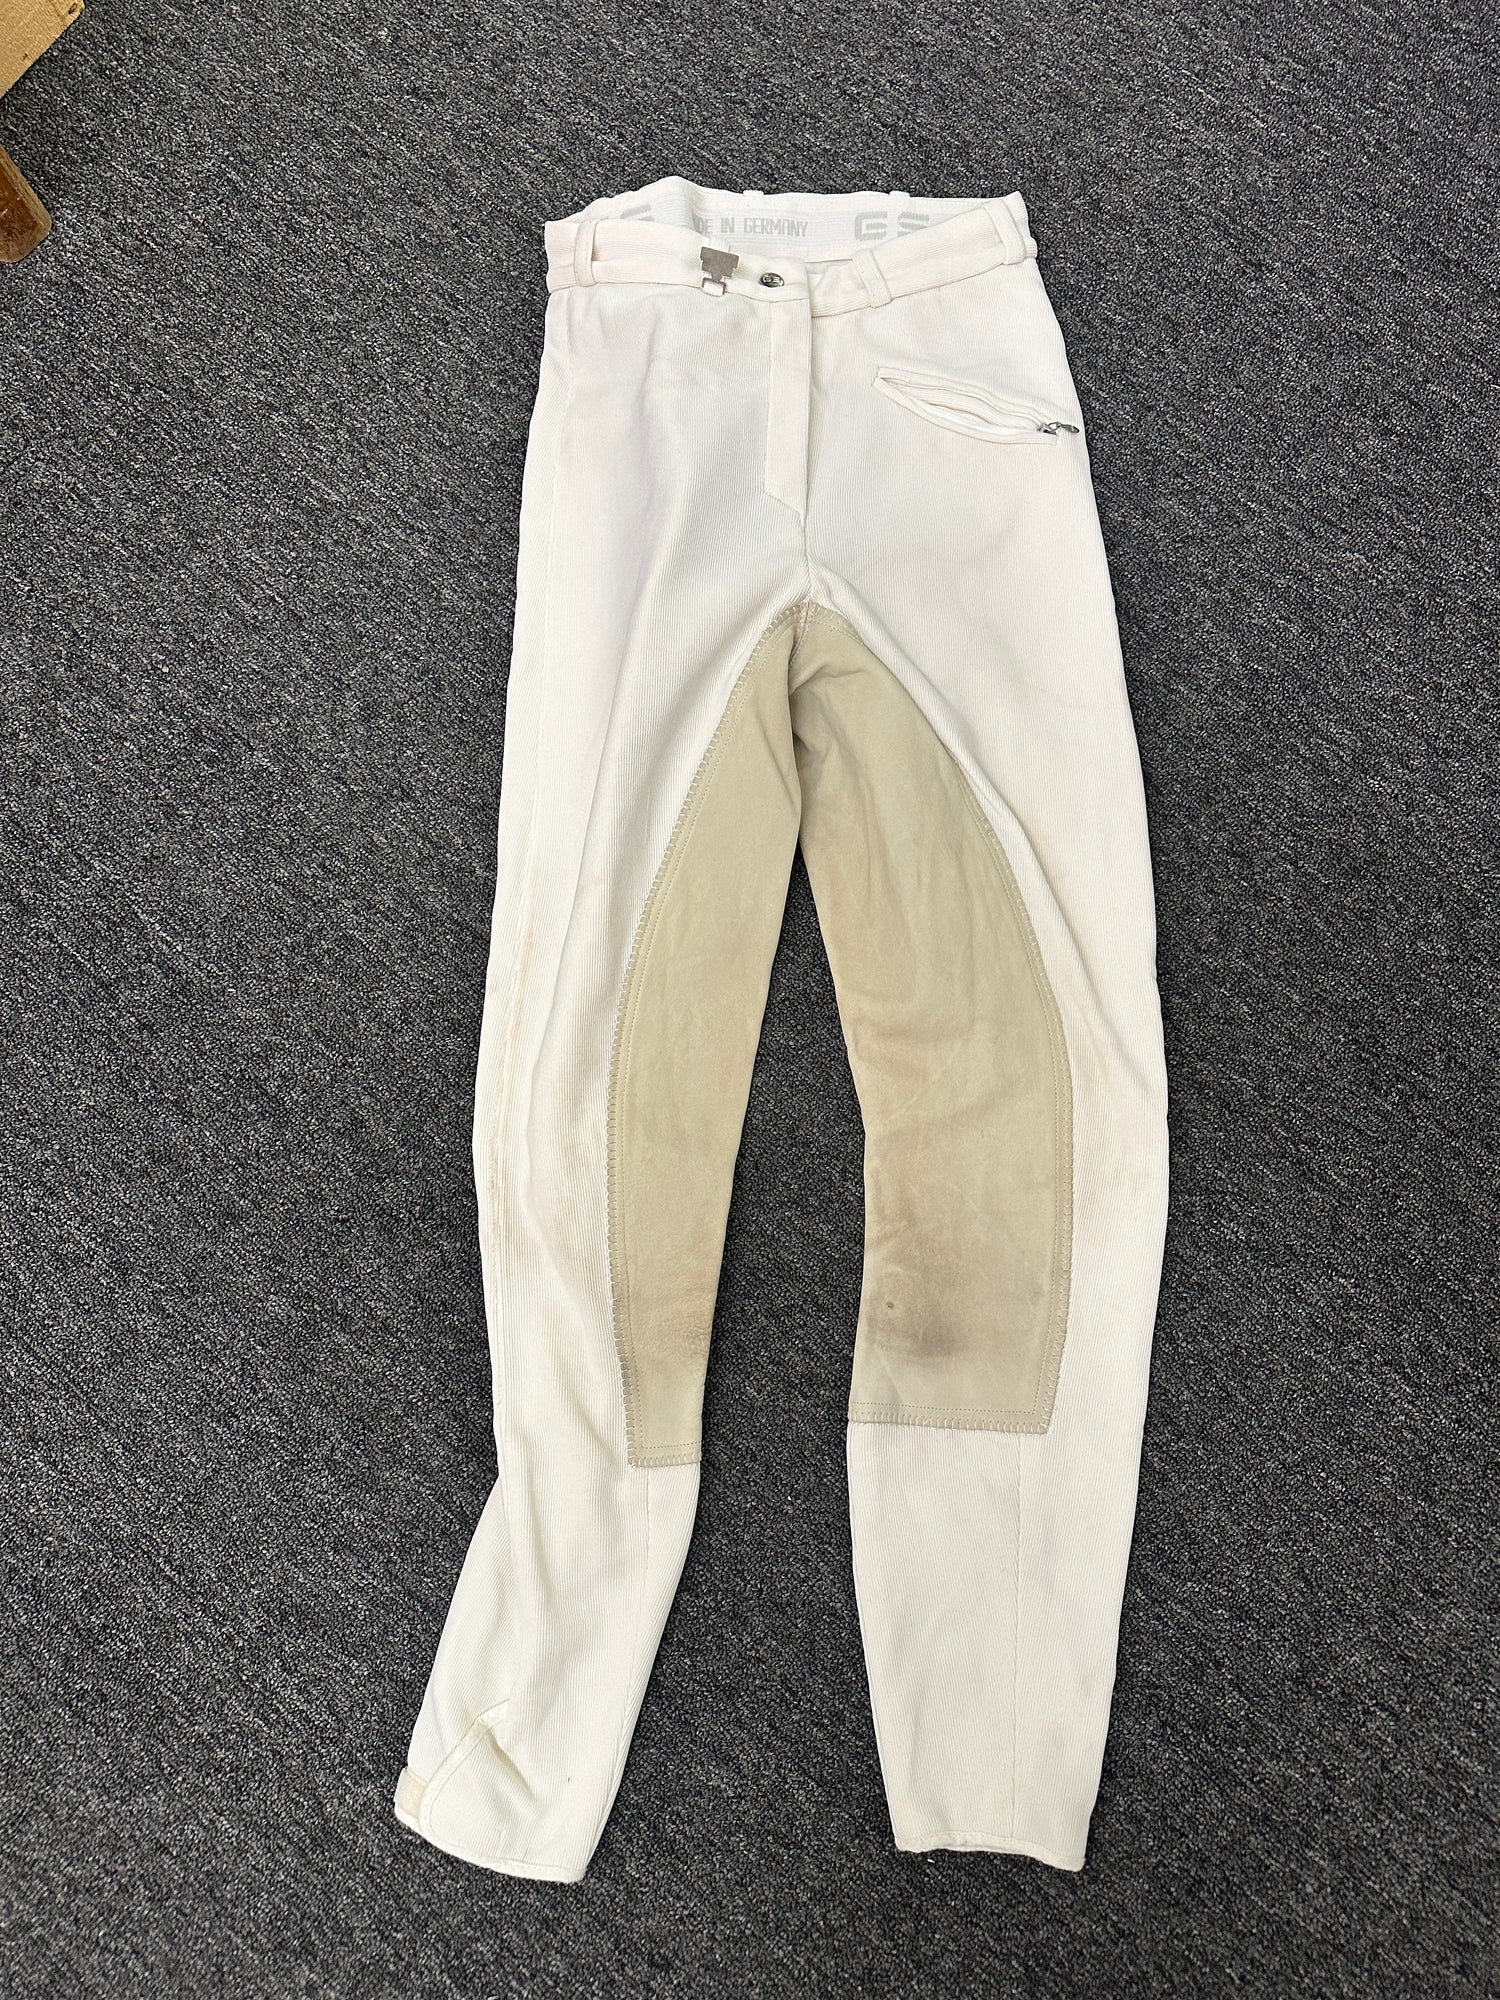 Women's Breeches Assorted - Used in good repair